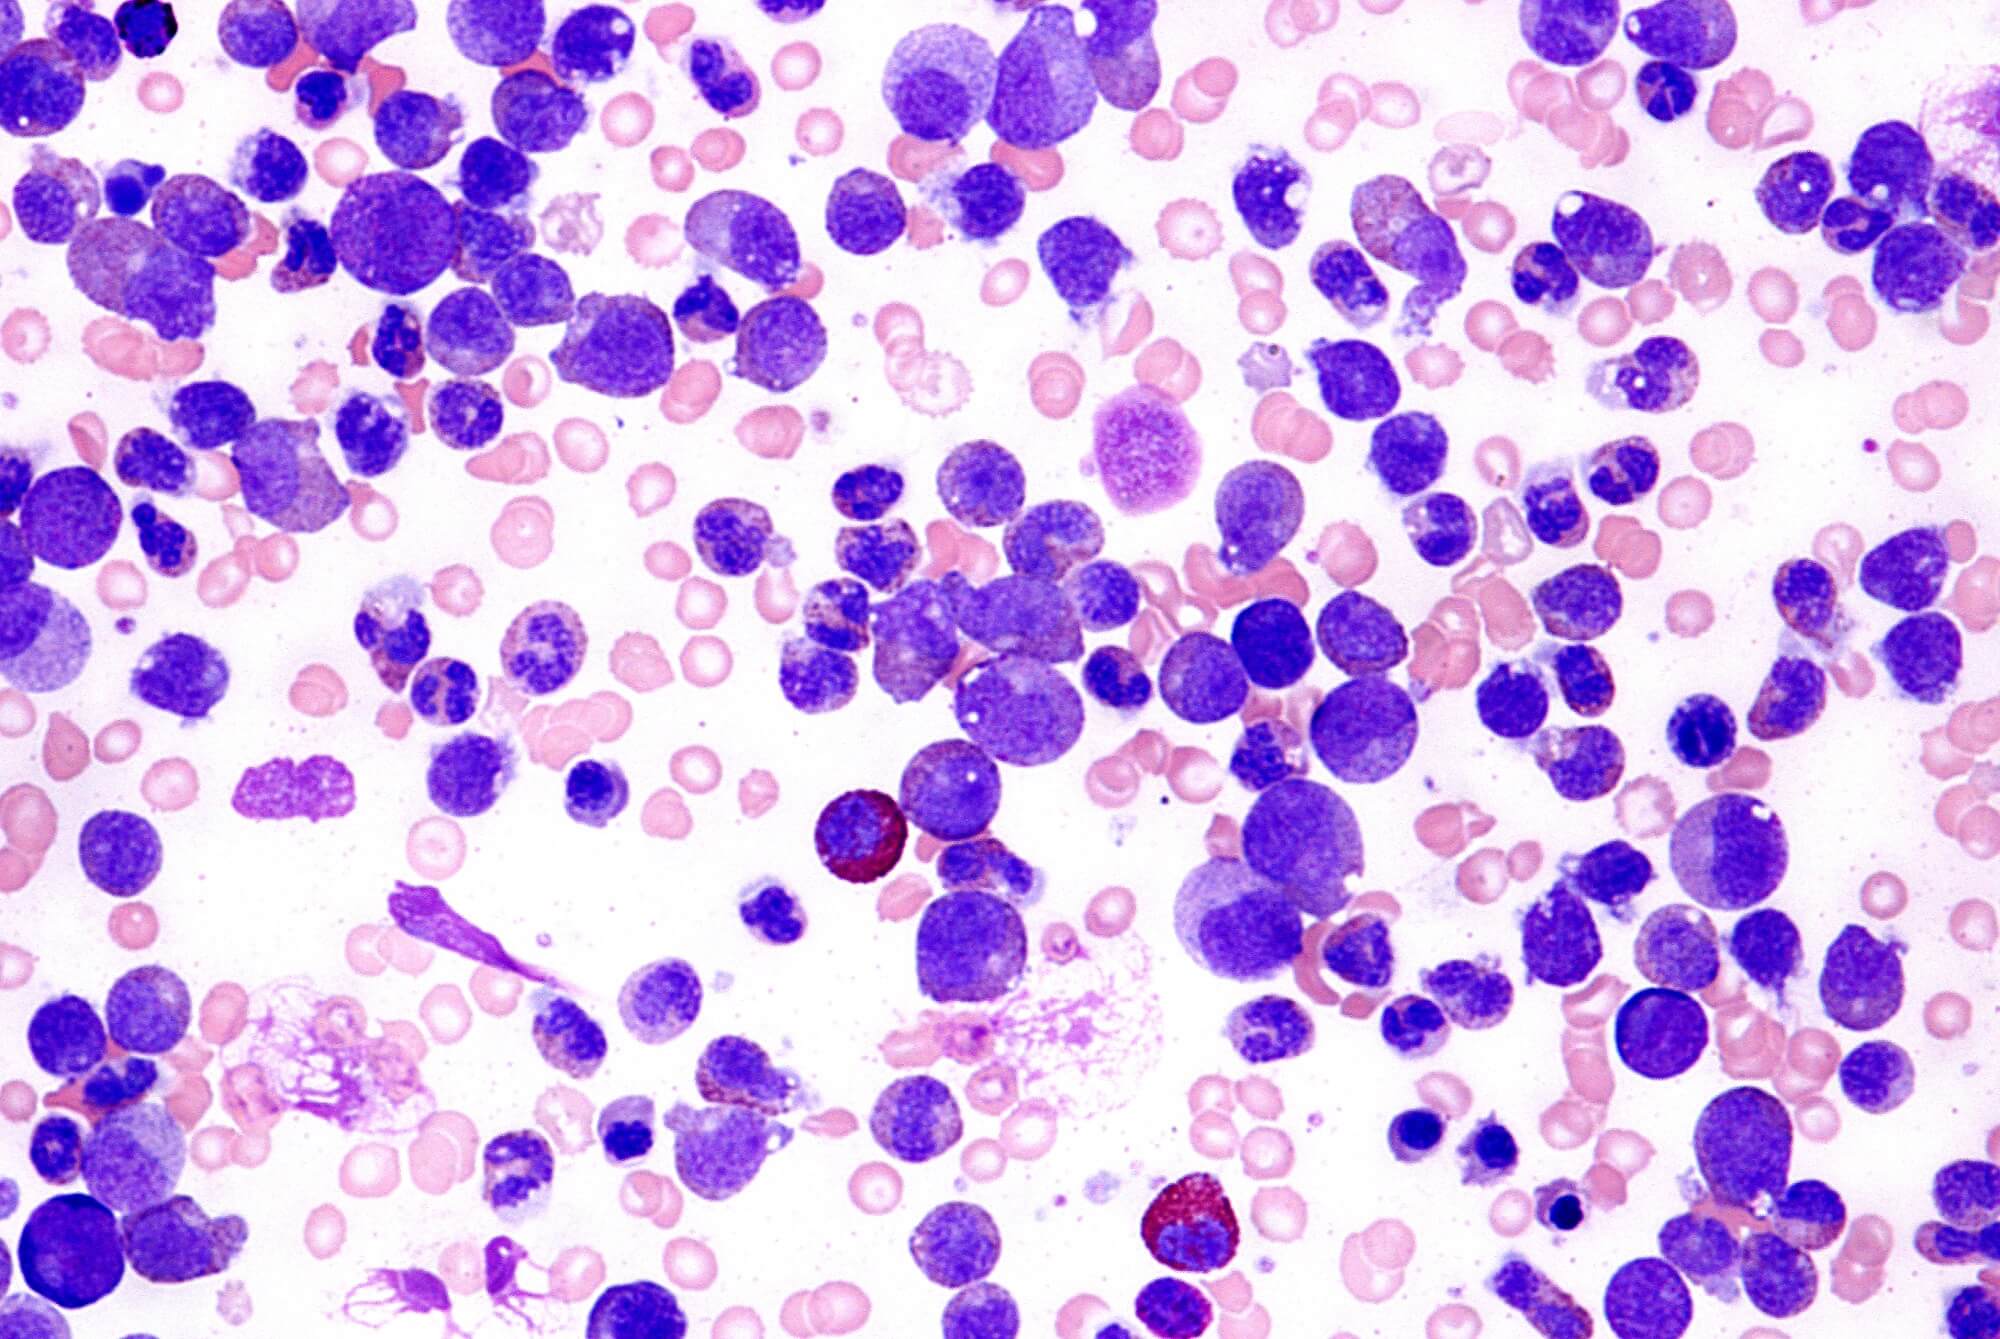 The Combination of Ponatinib and Alpha-Interferon can Improve Outcome of Resistant Chronic Myeloid Leukemia Patients